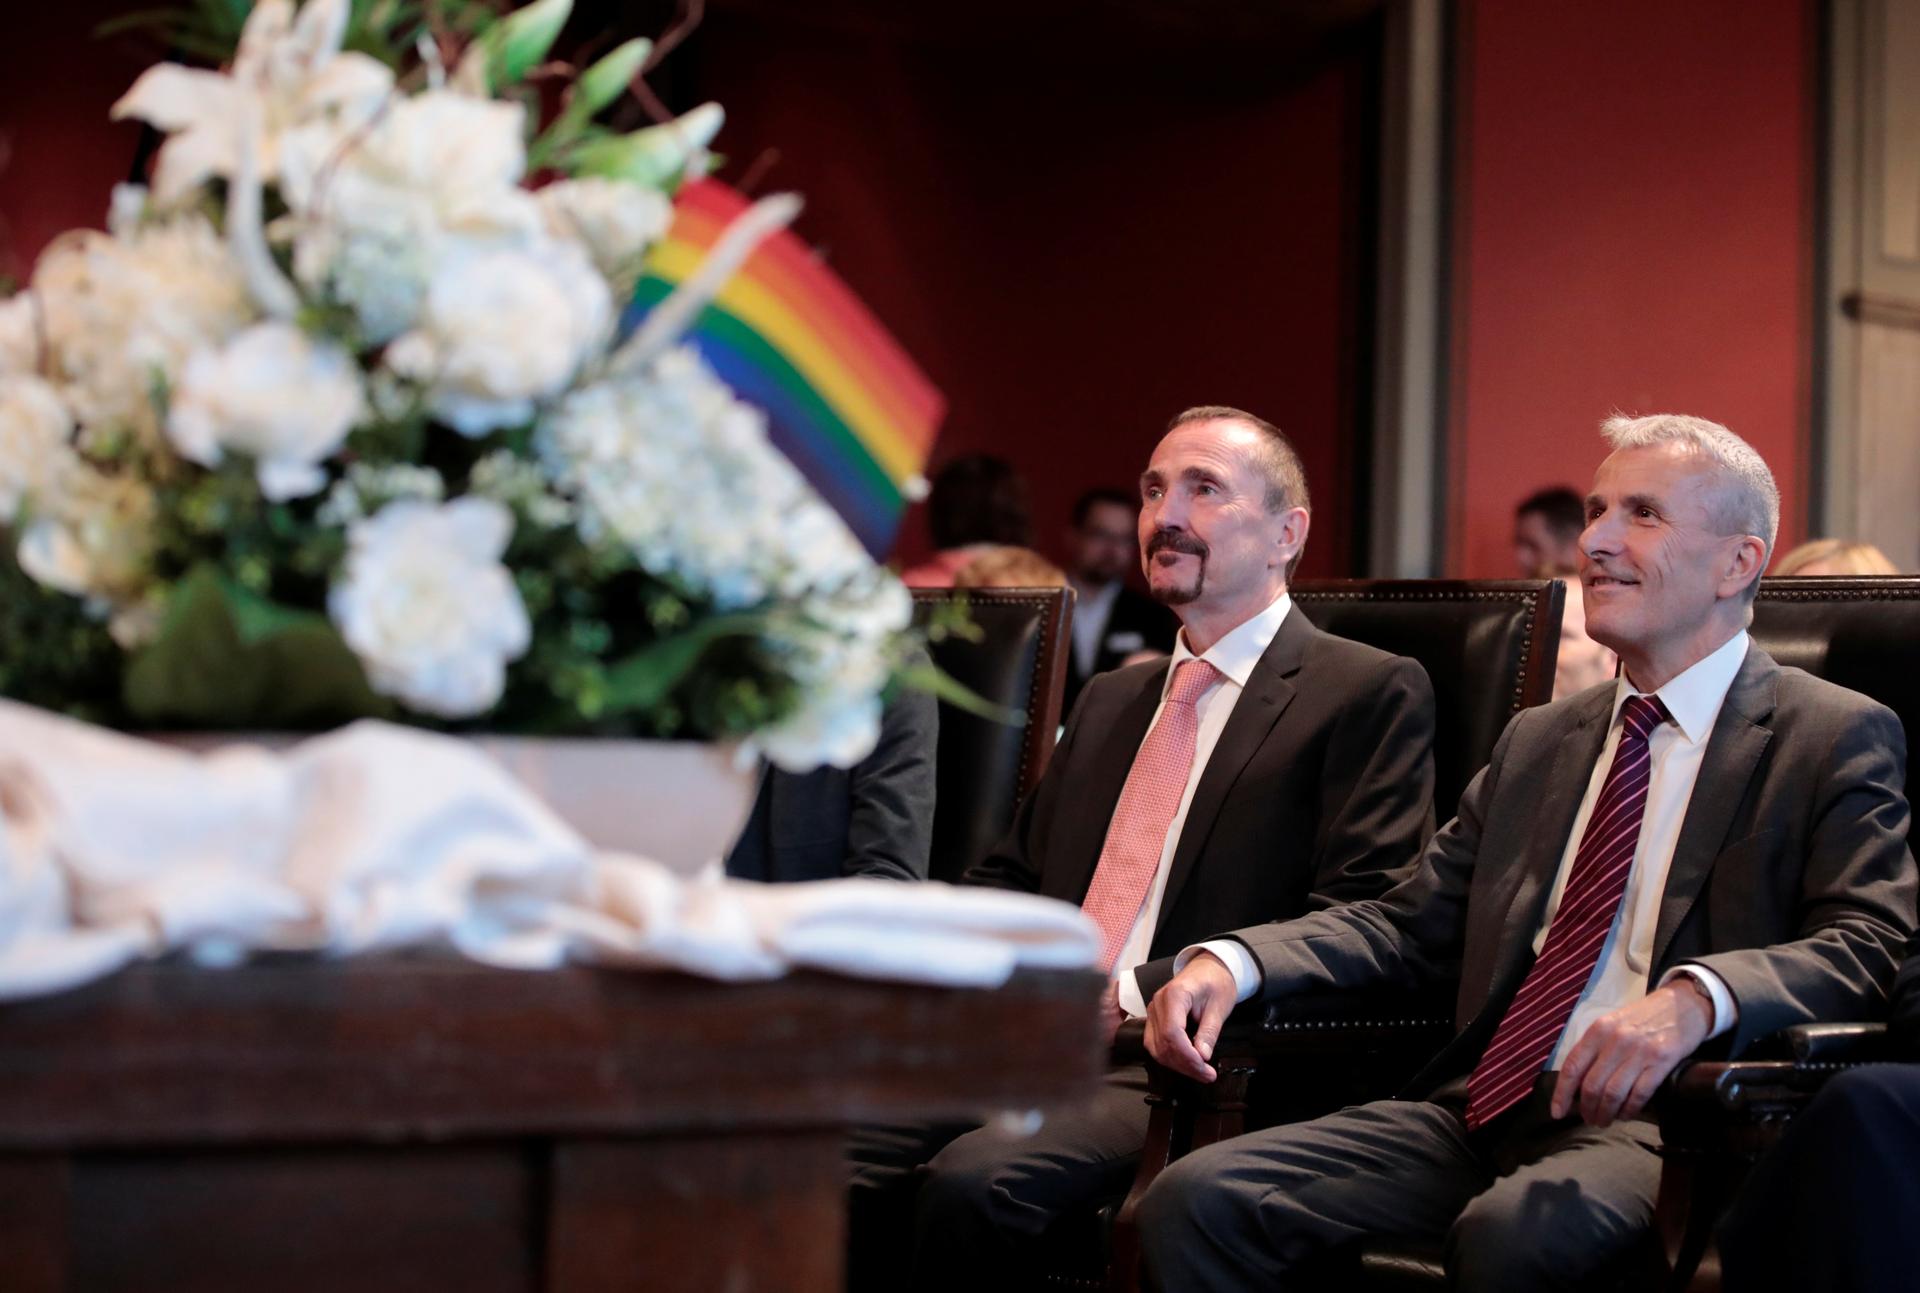 Same-sex couple Karl Kreil and Bodo Mende get married at a civil registry office, becoming Germany's first married gay couple